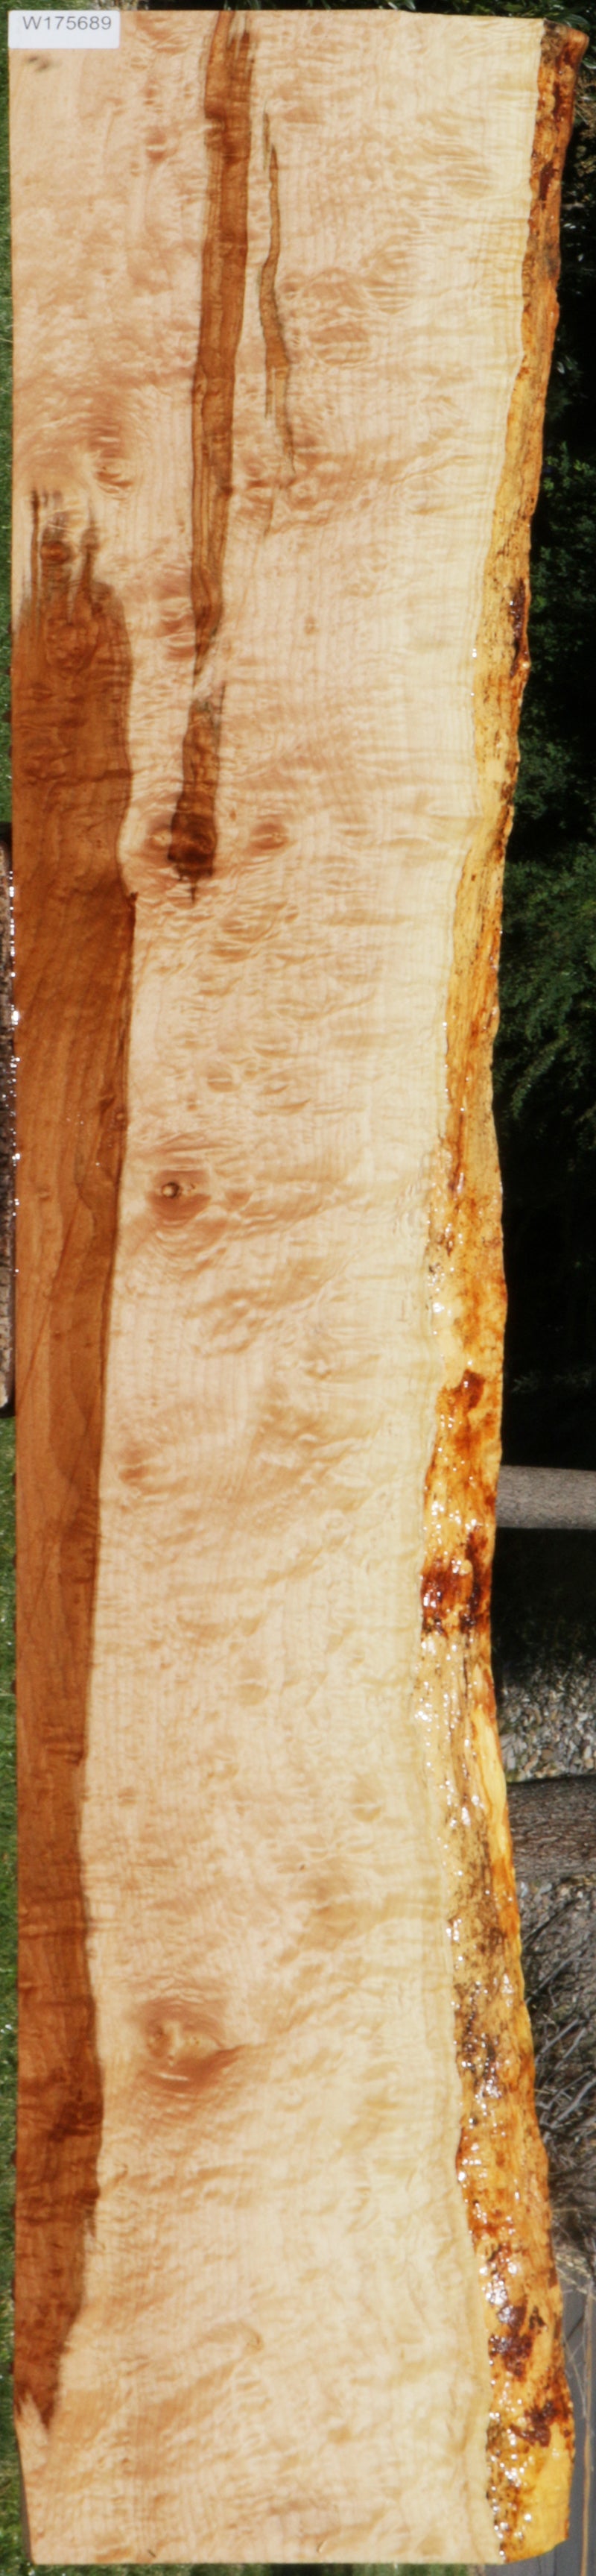 Spalted Maple Live Edge Lumber (Freight Shipping Required)